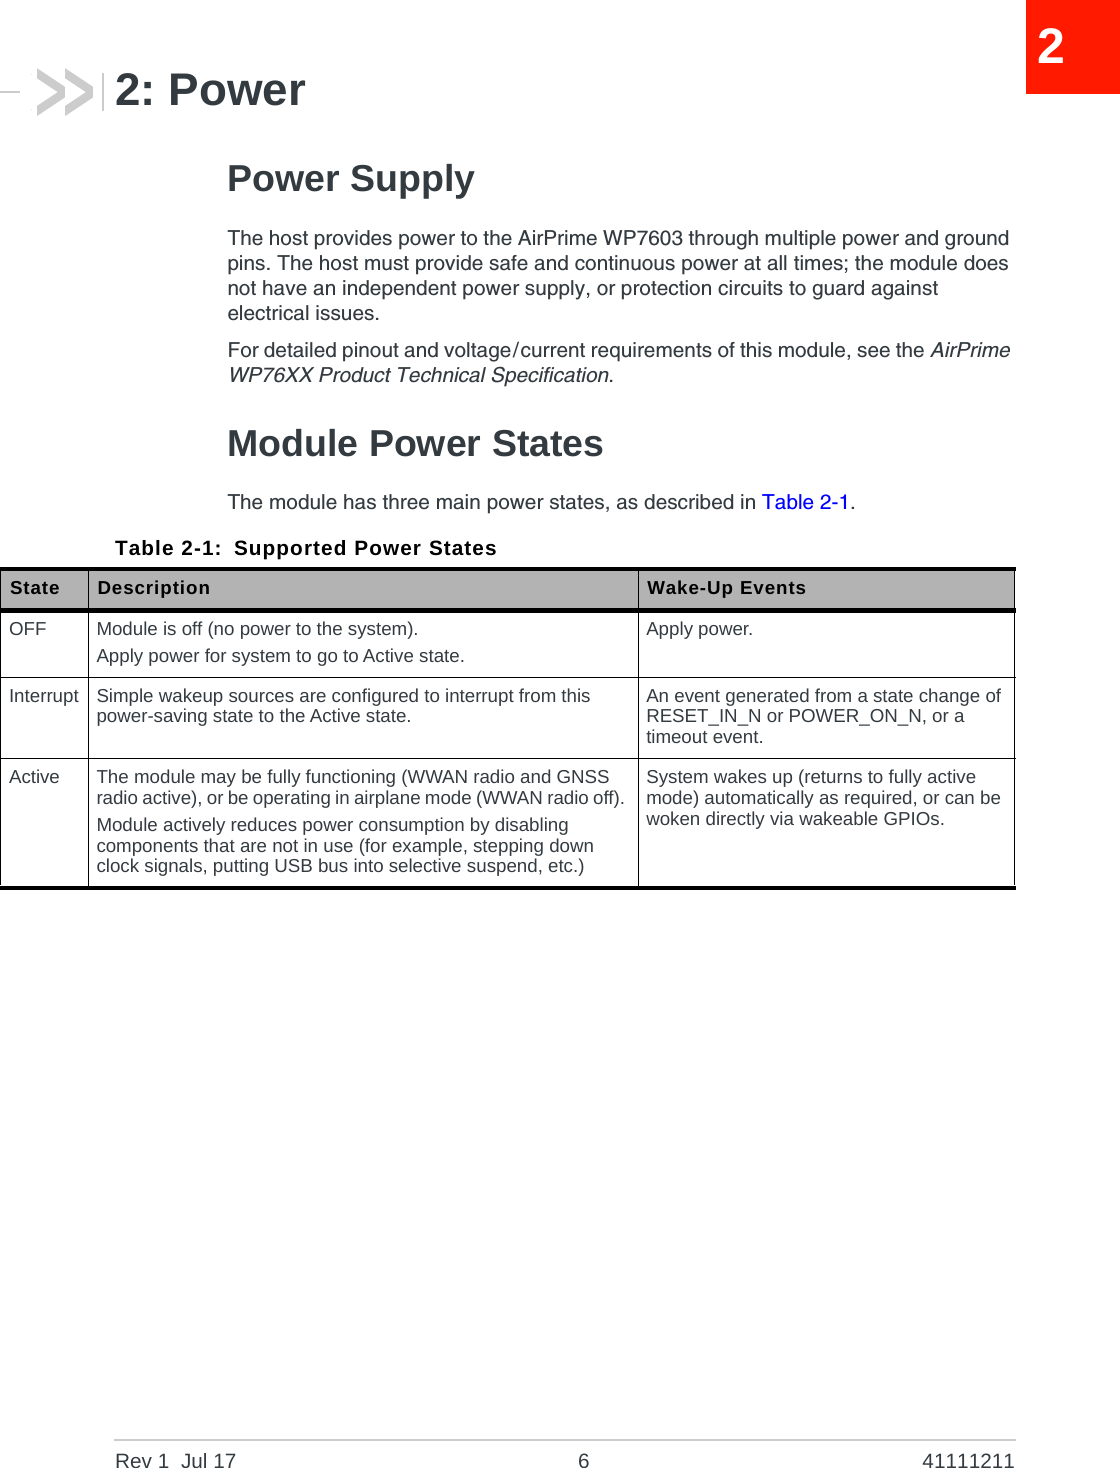 Rev 1  Jul 17 6 4111121122: PowerPower SupplyThe host provides power to the AirPrime WP7603 through multiple power and ground pins. The host must provide safe and continuous power at all times; the module does not have an independent power supply, or protection circuits to guard against electrical issues.For detailed pinout and voltage/current requirements of this module, see the AirPrime WP76XX Product Technical Specification.Module Power StatesThe module has three main power states, as described in Table 2-1.Table 2-1: Supported Power StatesState Description Wake-Up EventsOFF Module is off (no power to the system).Apply power for system to go to Active state.Apply power.Interrupt Simple wakeup sources are configured to interrupt from this power-saving state to the Active state. An event generated from a state change of RESET_IN_N or POWER_ON_N, or a timeout event.Active The module may be fully functioning (WWAN radio and GNSS radio active), or be operating in airplane mode (WWAN radio off). Module actively reduces power consumption by disabling components that are not in use (for example, stepping down clock signals, putting USB bus into selective suspend, etc.)System wakes up (returns to fully active mode) automatically as required, or can be woken directly via wakeable GPIOs. 